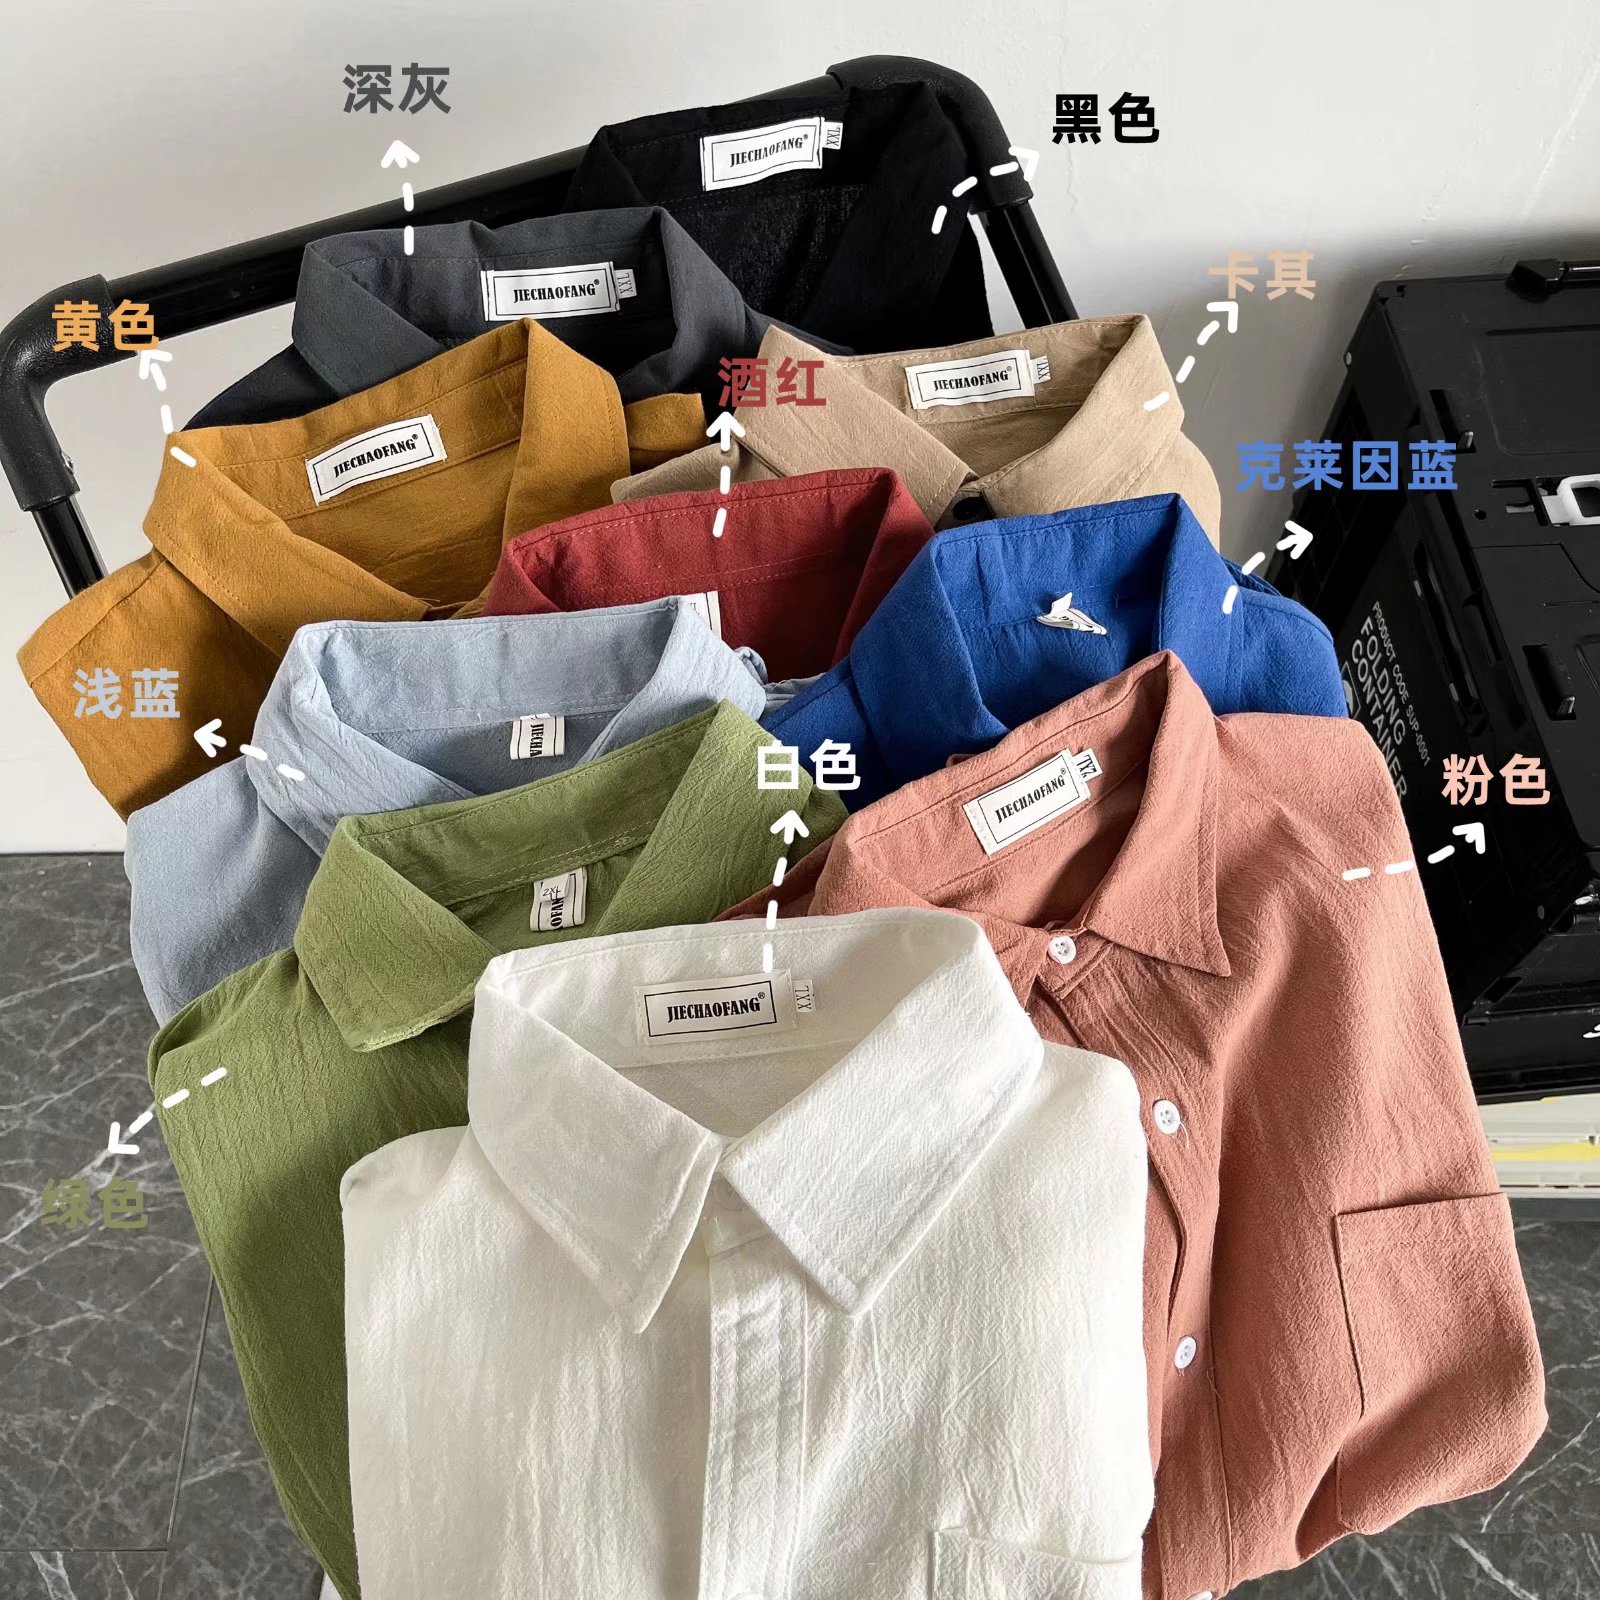 Linen shirt men's long sleeved loose fitting casual summer thin sun protection jacket men's trendy clothes cotton linen shirt size